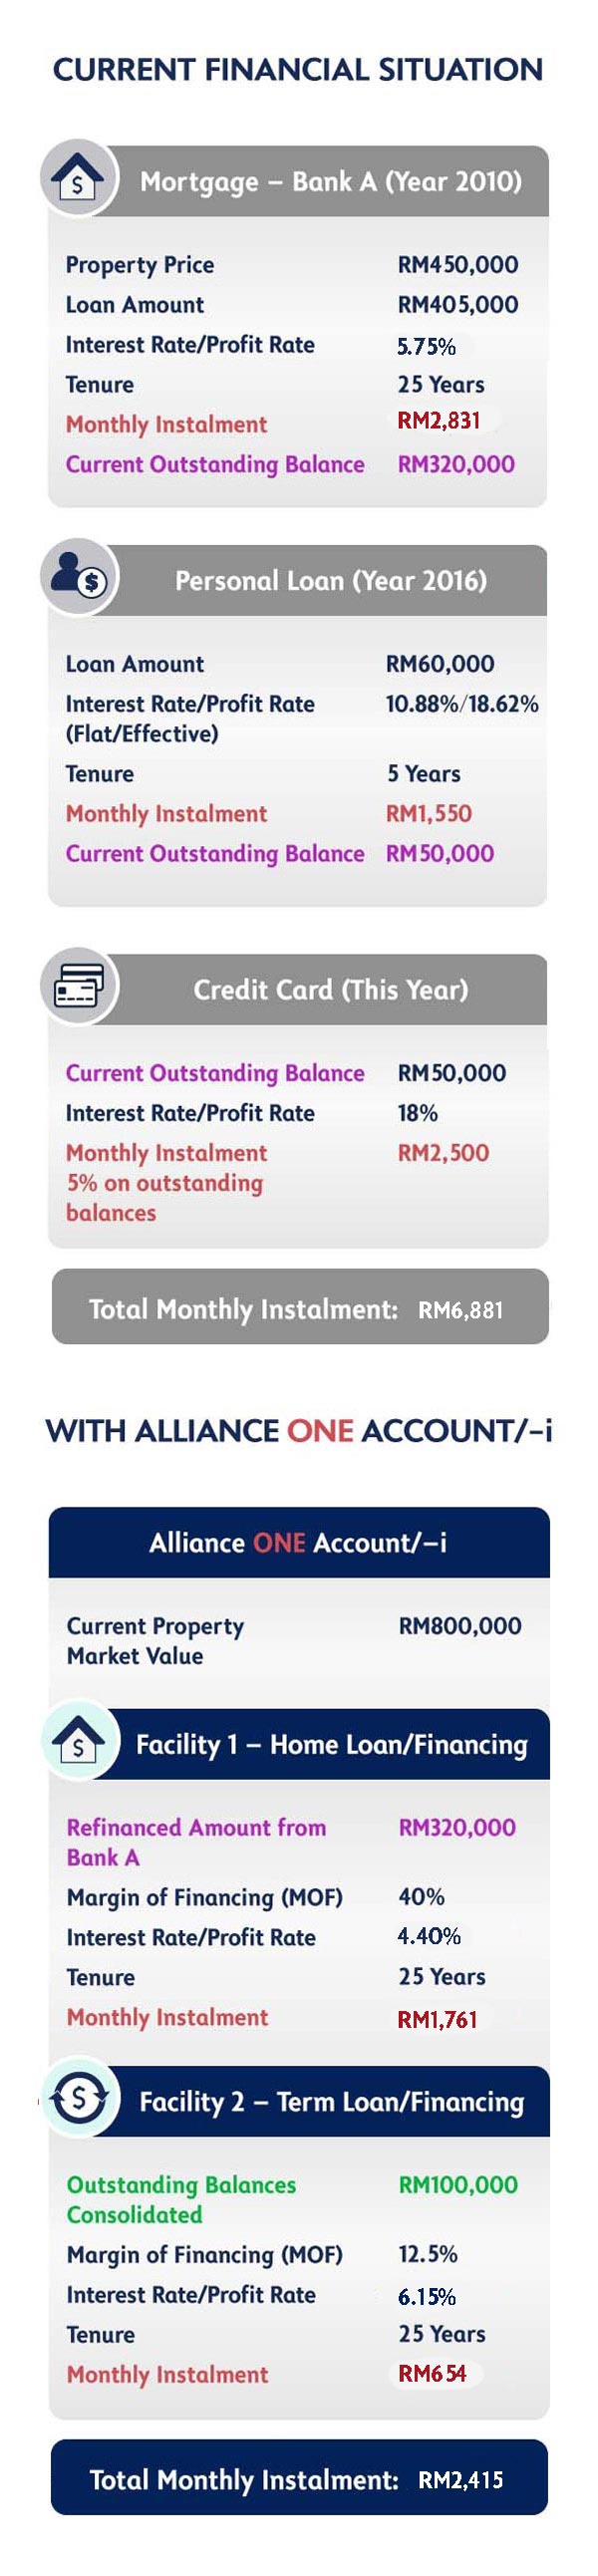 Refinance To Get Extra Cash And Interest/Profit Savings